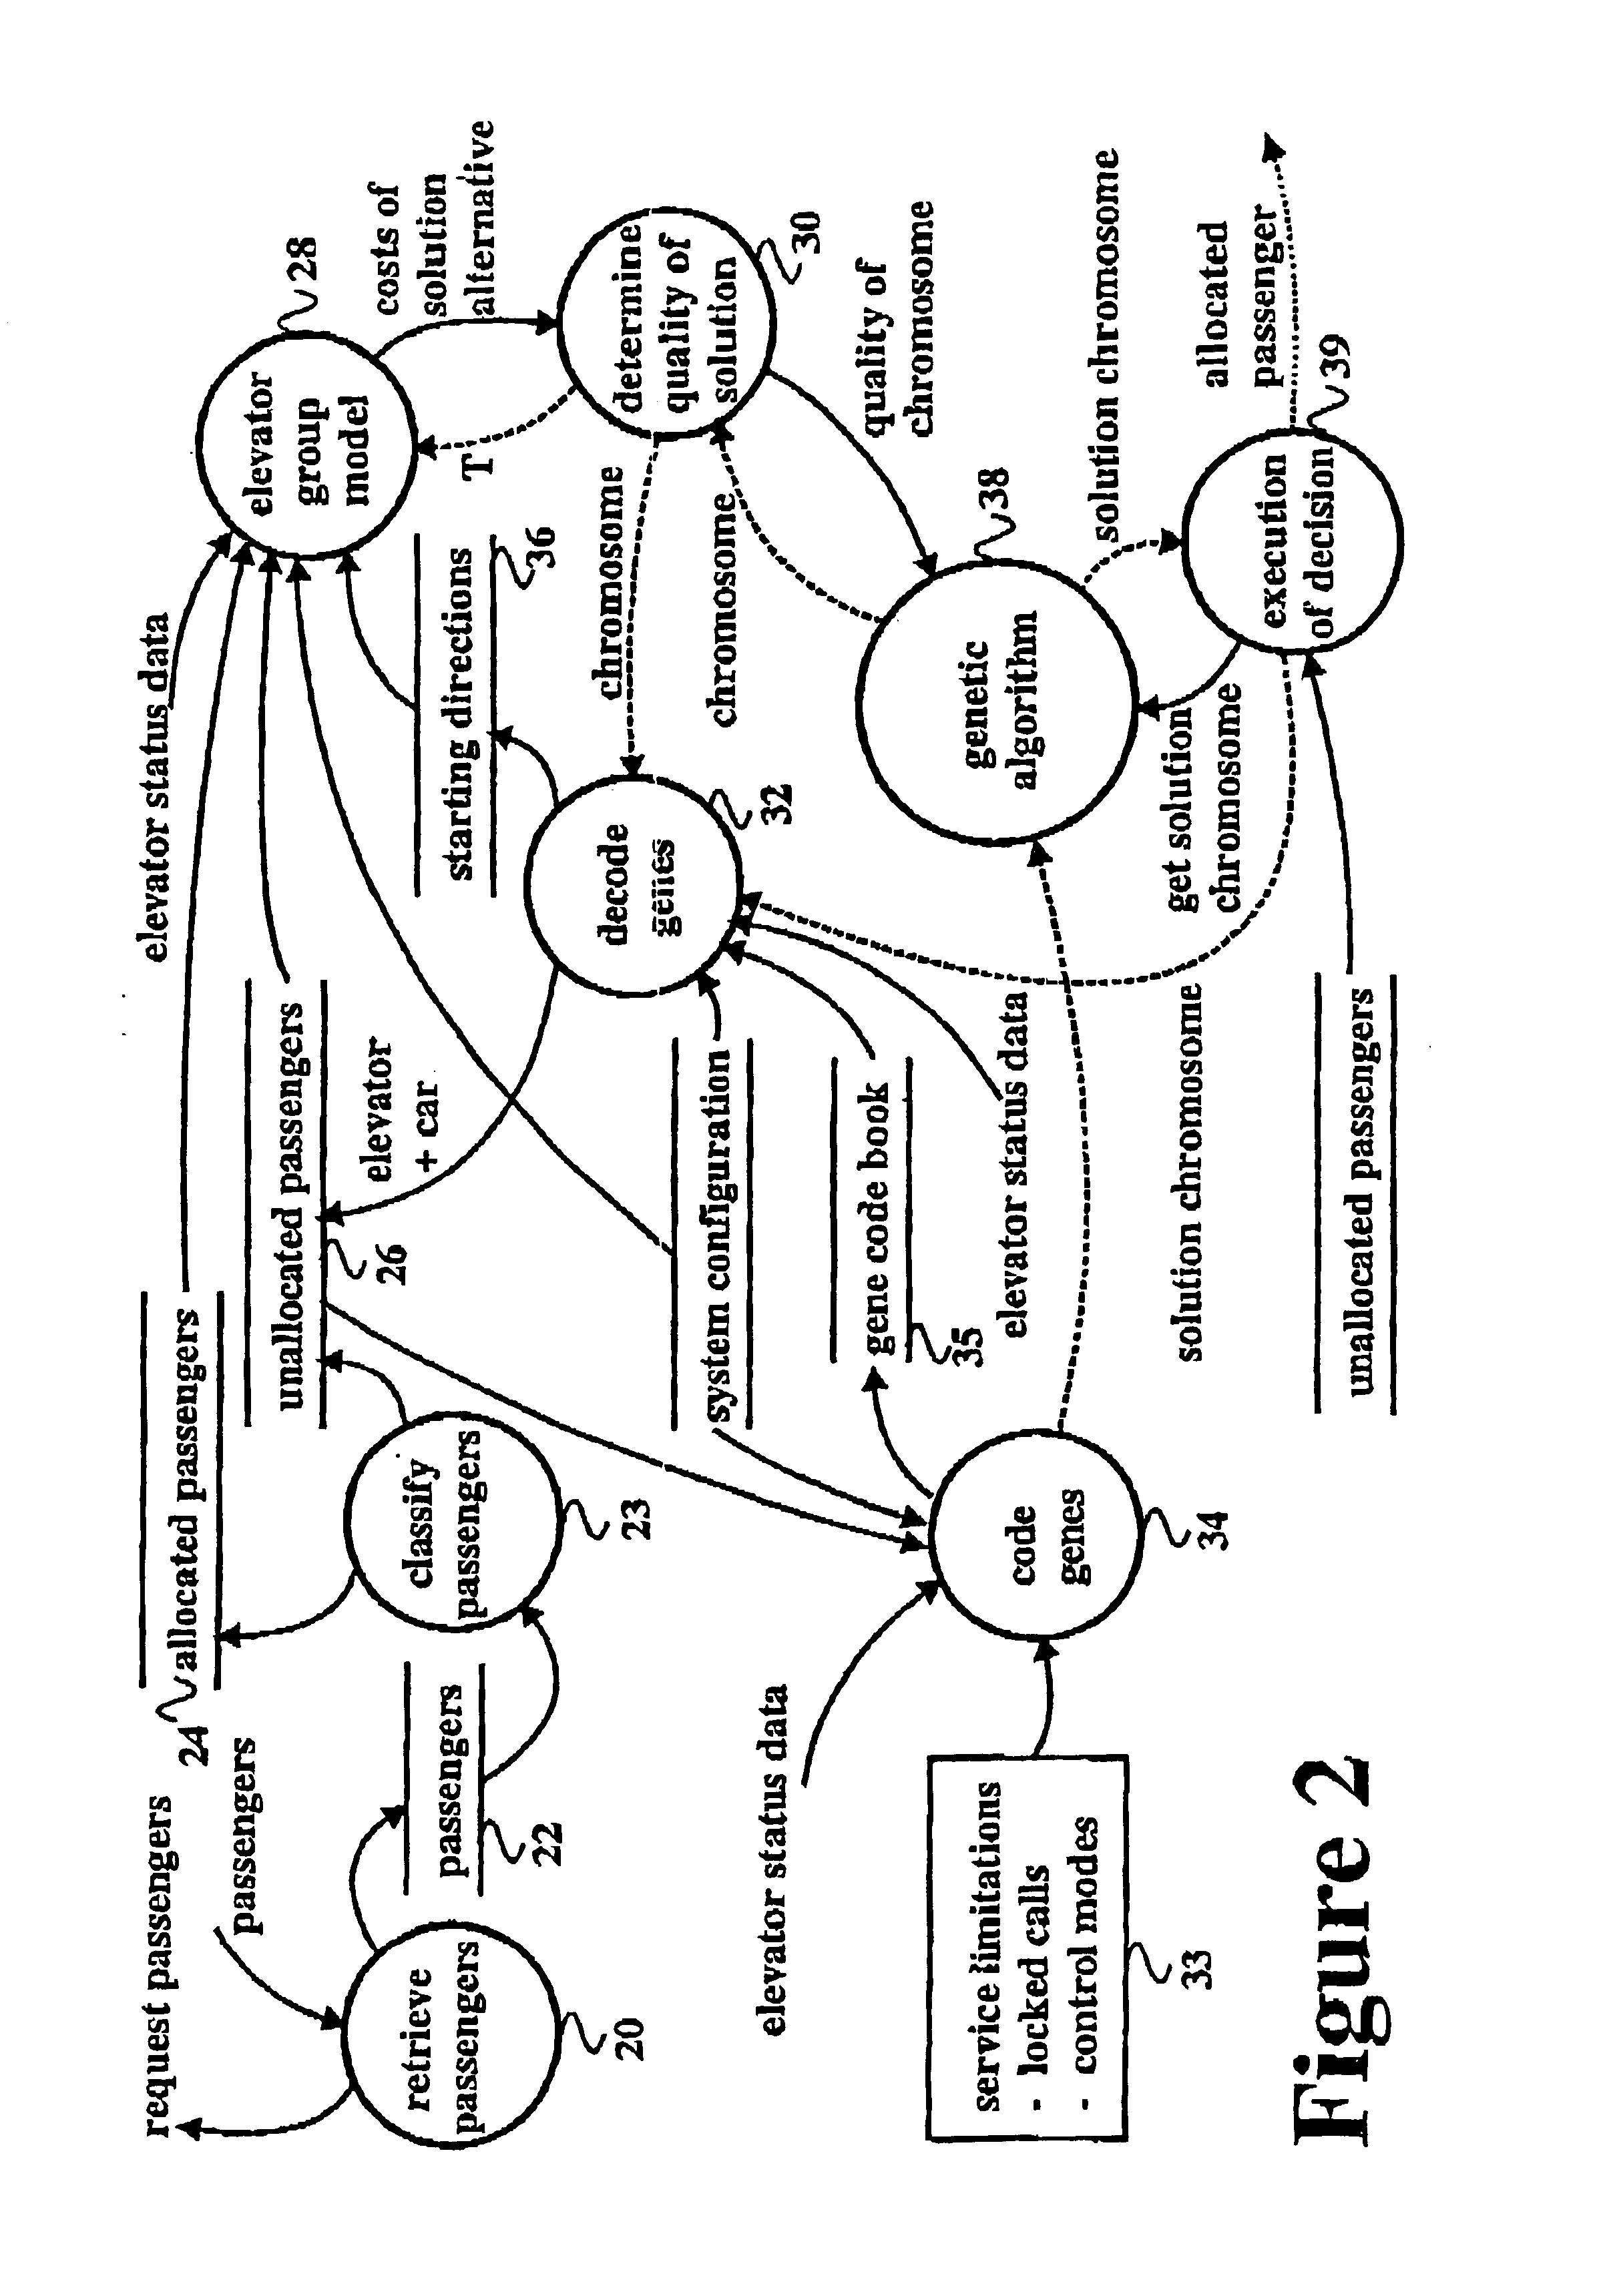 Method and apparatus for allocating passengers by a genetic algorithm